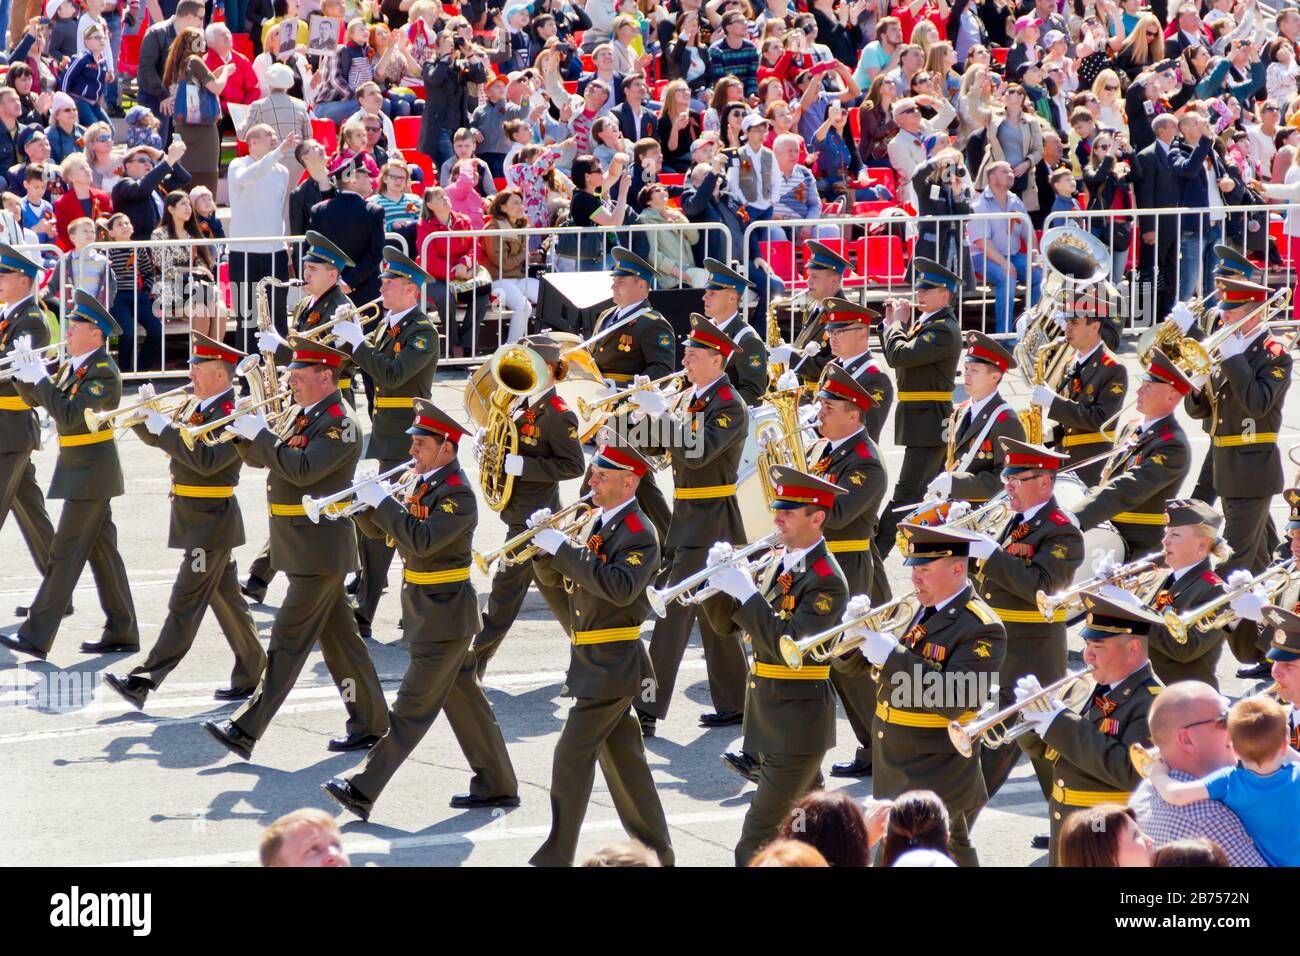 SAMARA, RUSSIA - MAY 9, 2016: Russian military orchestra march at the parade on annual Victory Day, May, 9, 2016 in Samara, Russia. Stock Photo